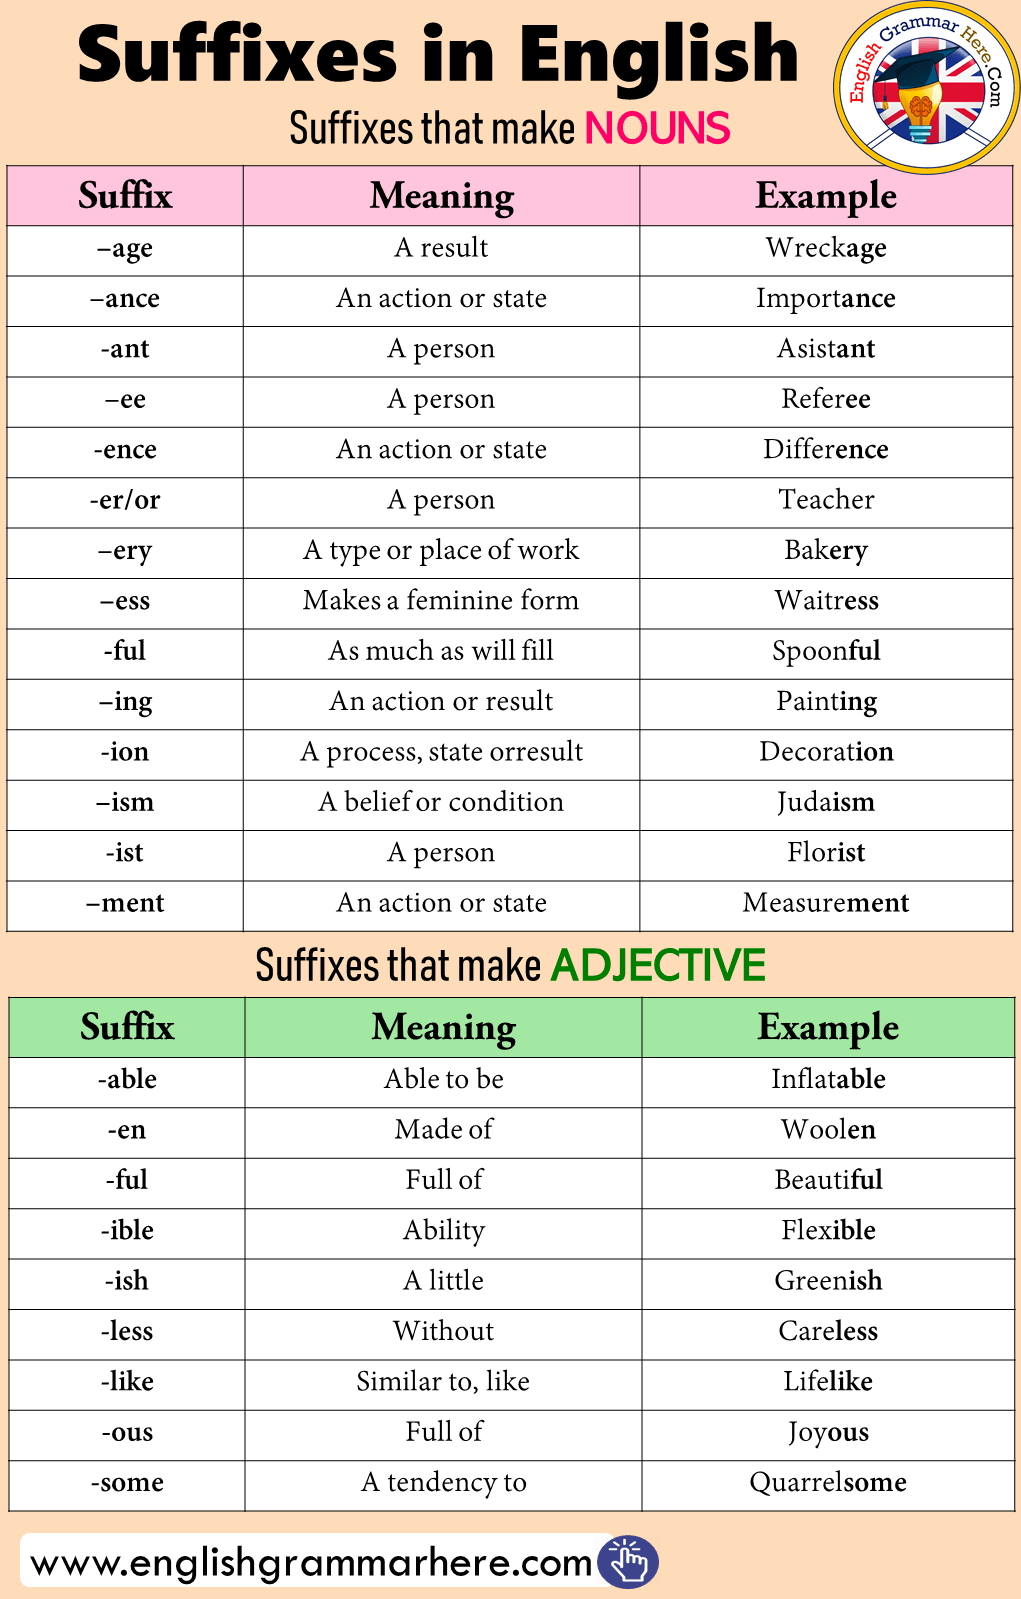 Suffixes in English